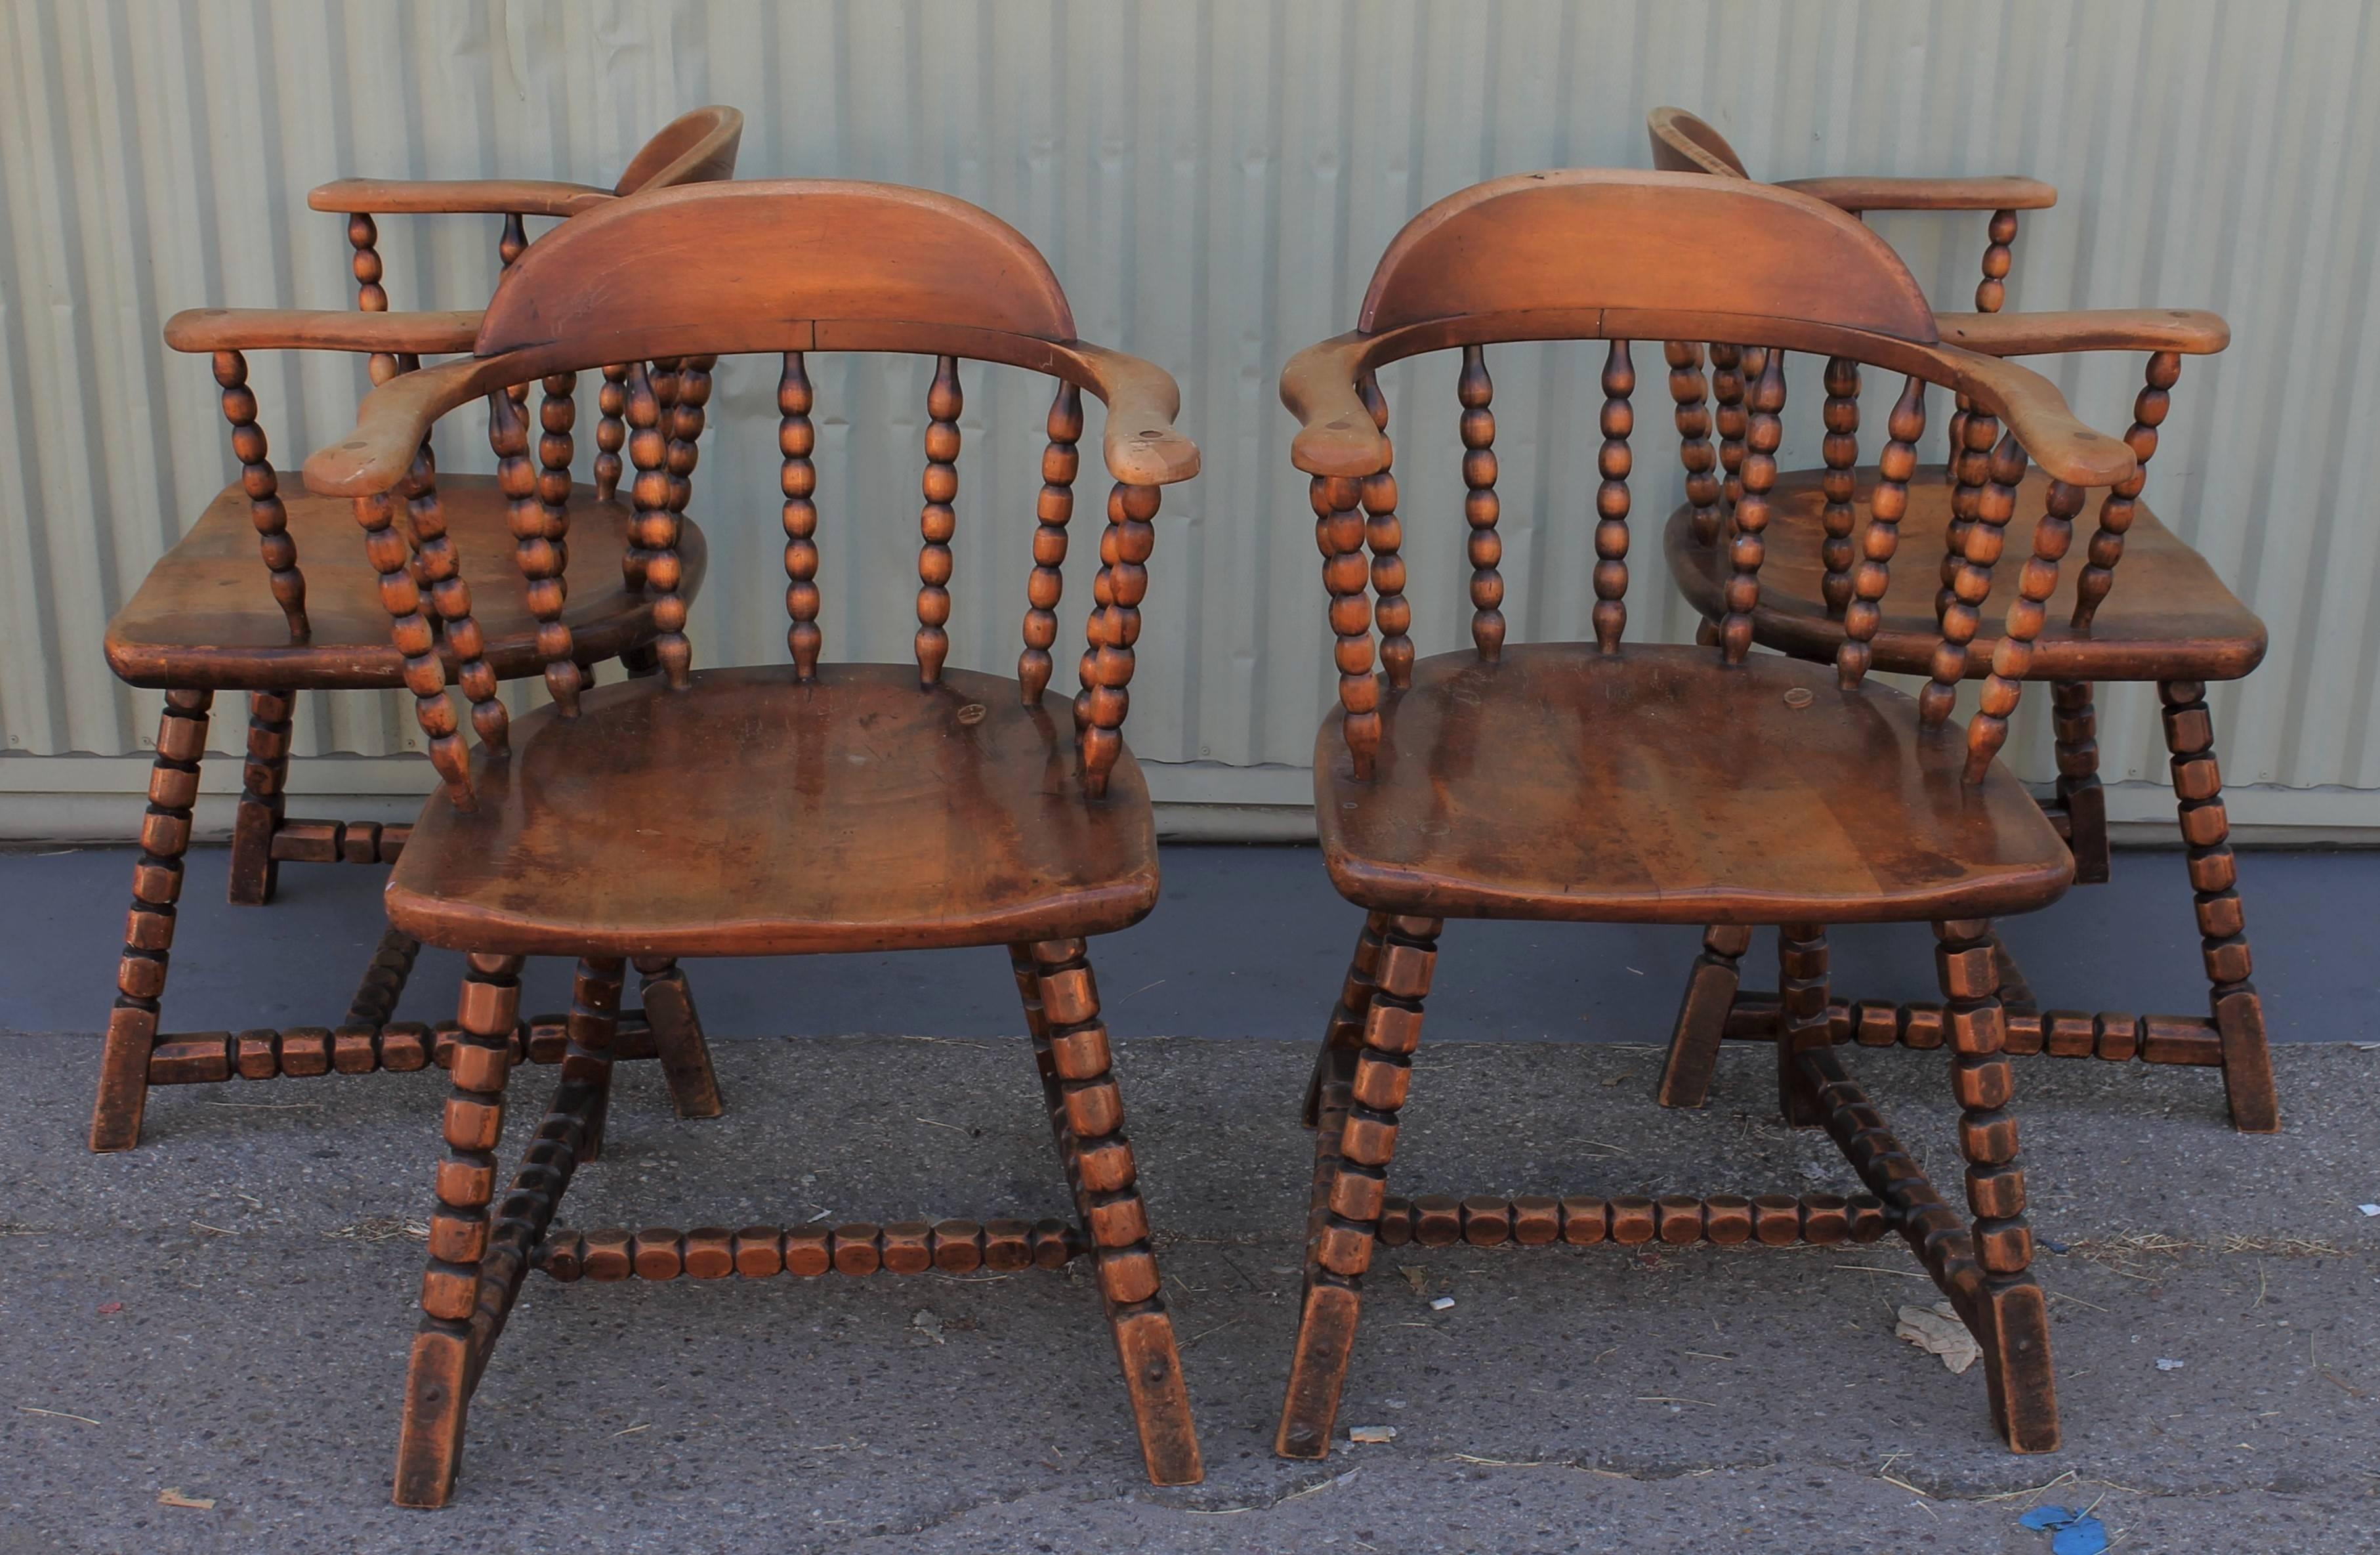 These western Monterey style worn captains chairs have a look of a saloon from the Mid-West. The worn spindle legs have hand-hammered copper nails in them. Seat height is 17